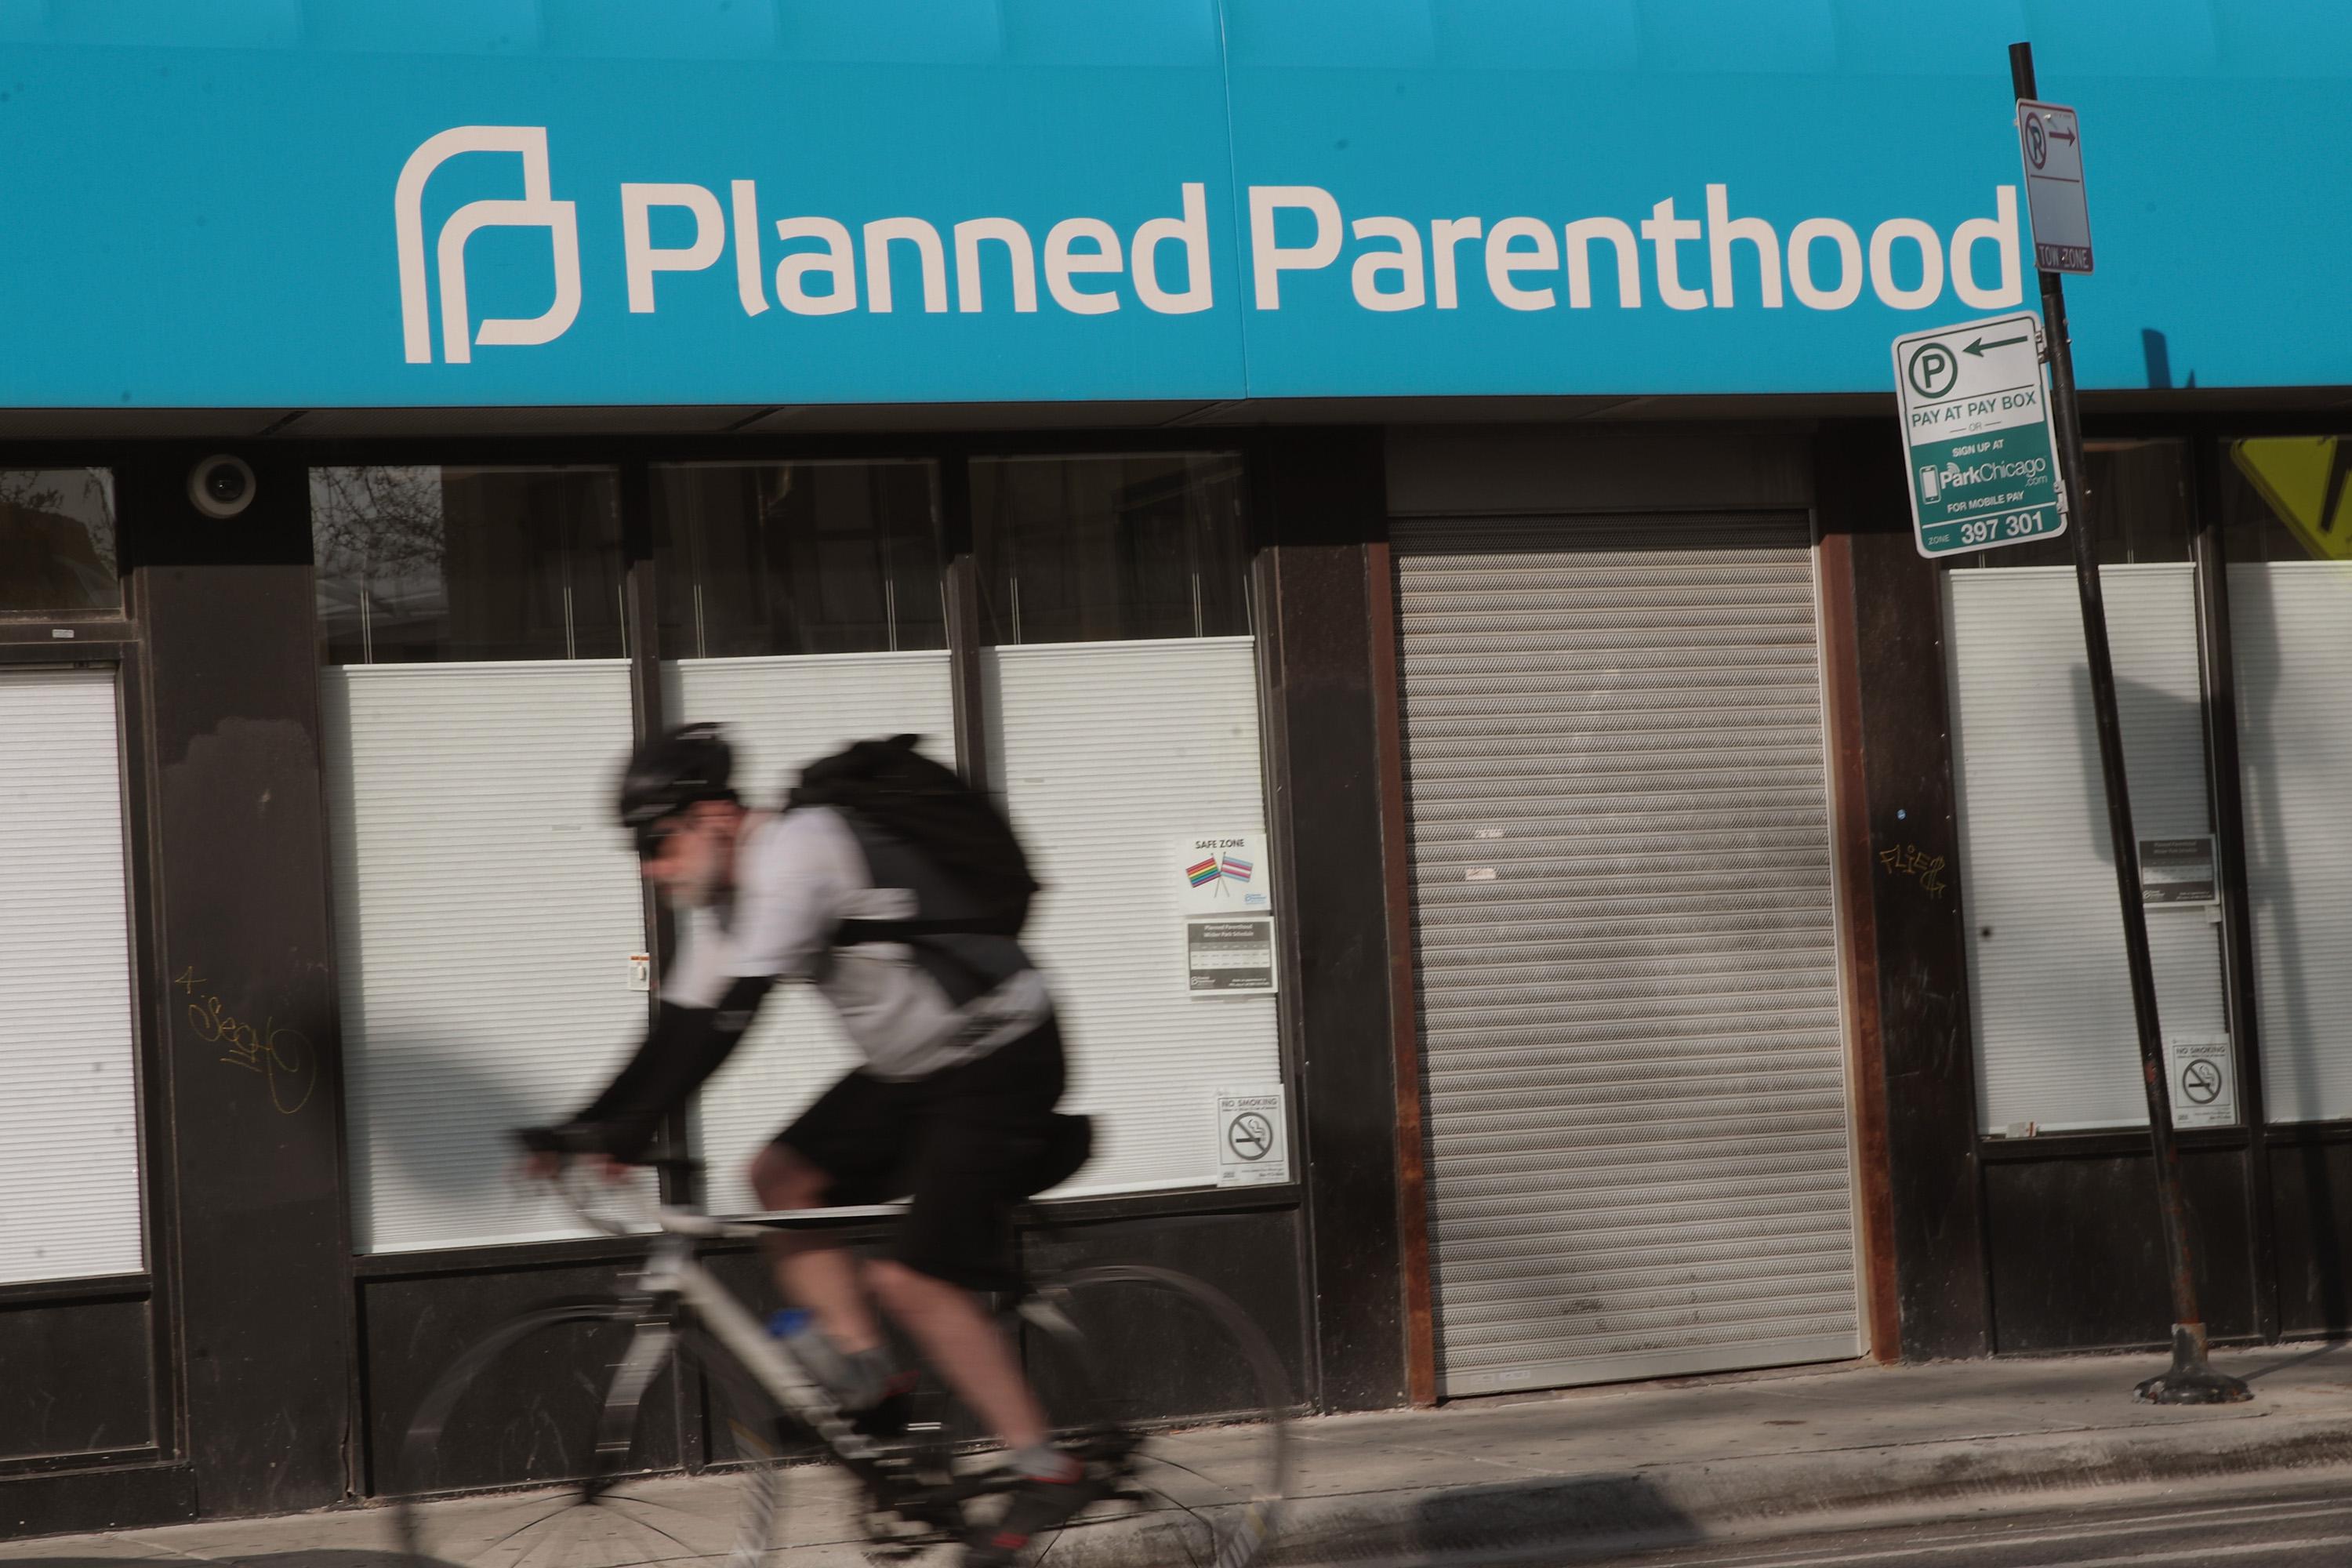 CHICAGO, IL - MAY 18:  A cyclist rides past a Planned Parenthood clinic on May 18, 2018 in Chicago, Illinois. The Trump administration is expected to announce a plan for massive funding cuts to Planned Parenthood and other taxpayer-backed abortion providers by reinstating a Reagan-era rule that prohibits federal funding from going to clinics that discuss abortion with women or that share space with abortion providers.  (Photo by Scott Olson/Getty Images)